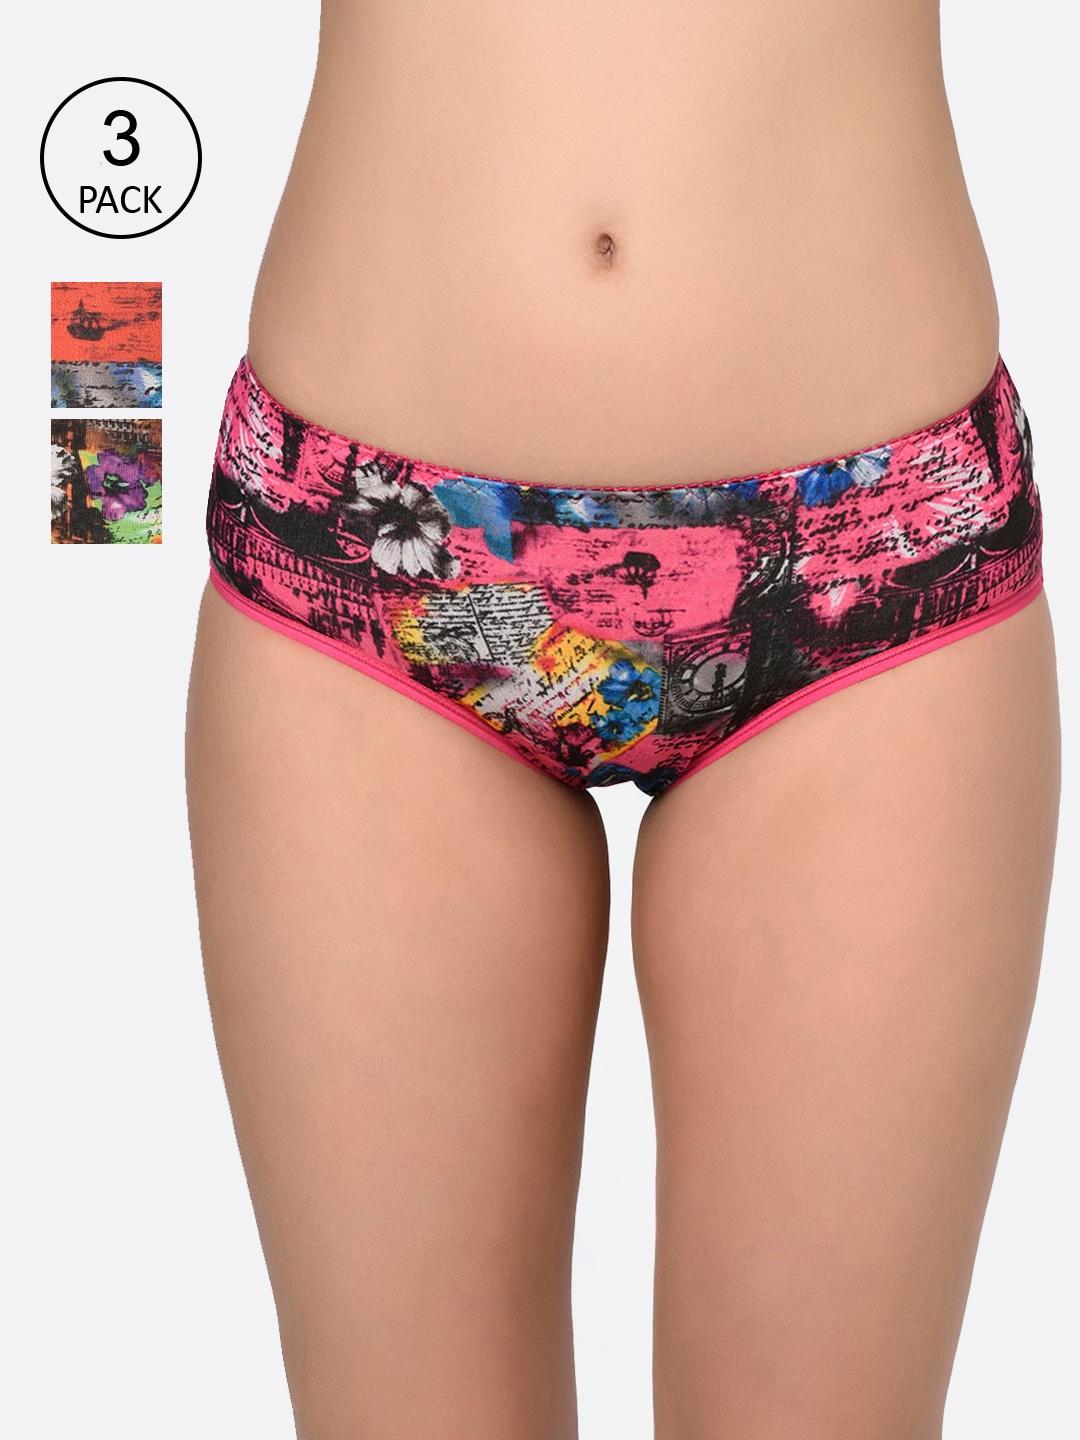 bodycare-women-pack-of-3-assorted-printed-hipster-briefs-9006-3pcs